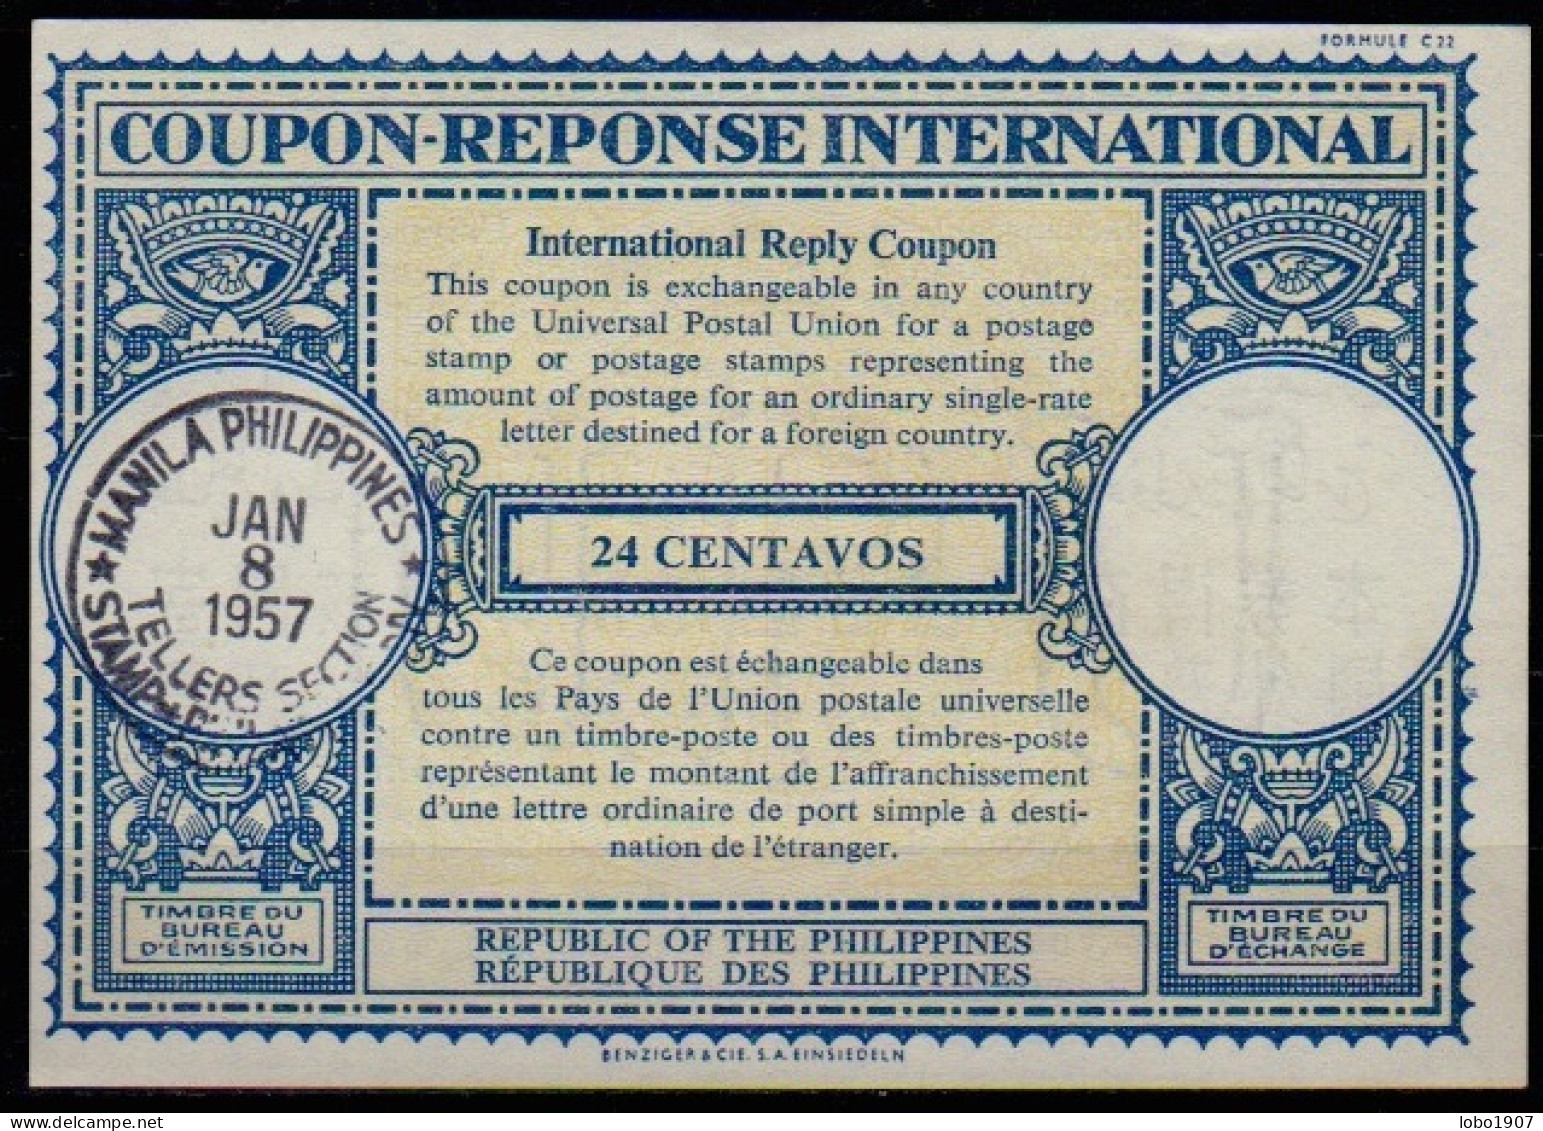 PHILIPPINES  Collection 15 International Reply Coupon Reponse Cupon Respuesta IRC IAS See List And Scans - Philippinen